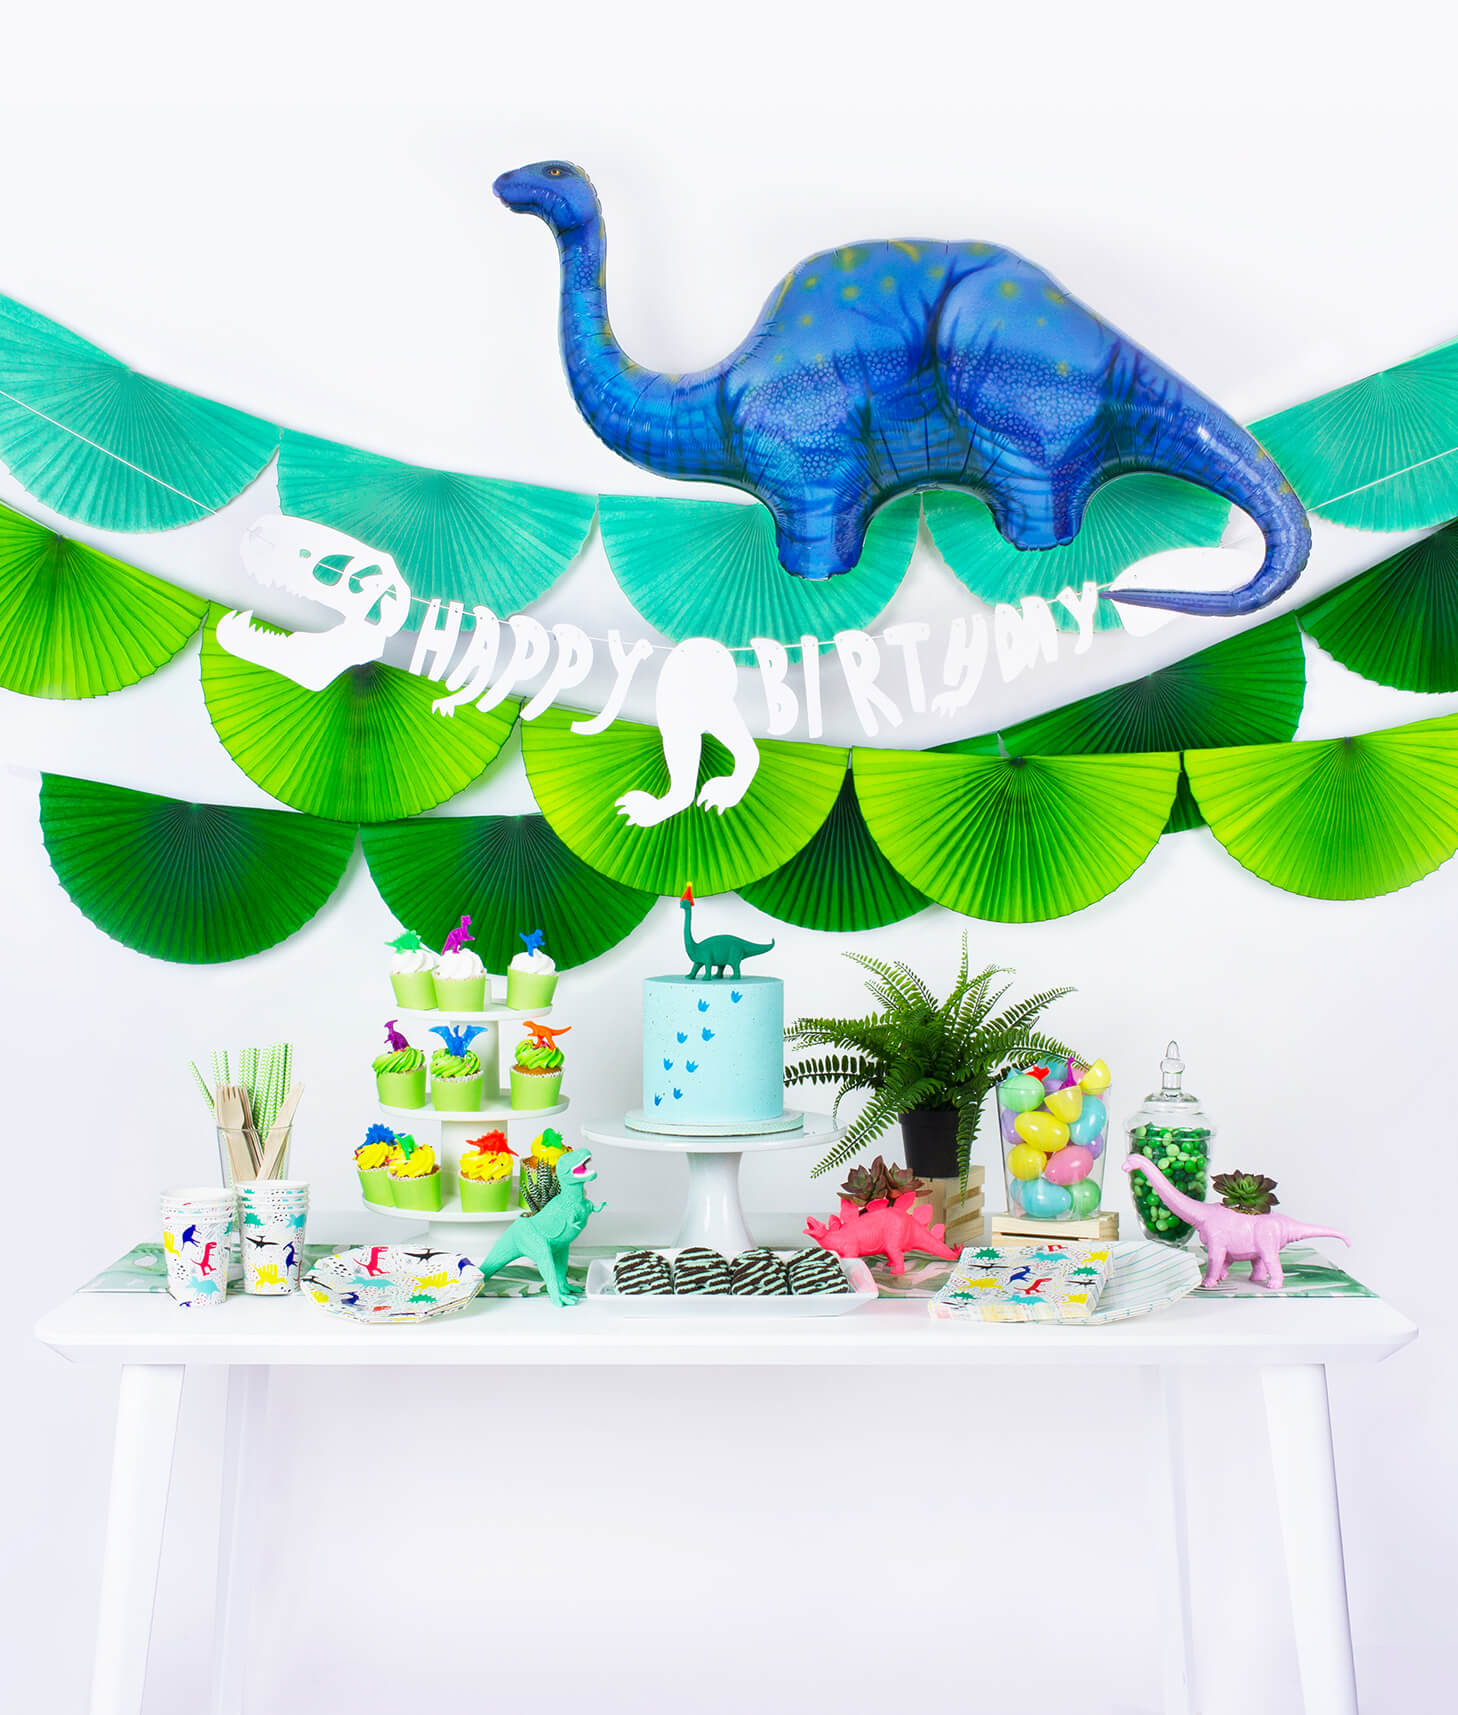 Morden and Neon Dinosaur theme party Set up look